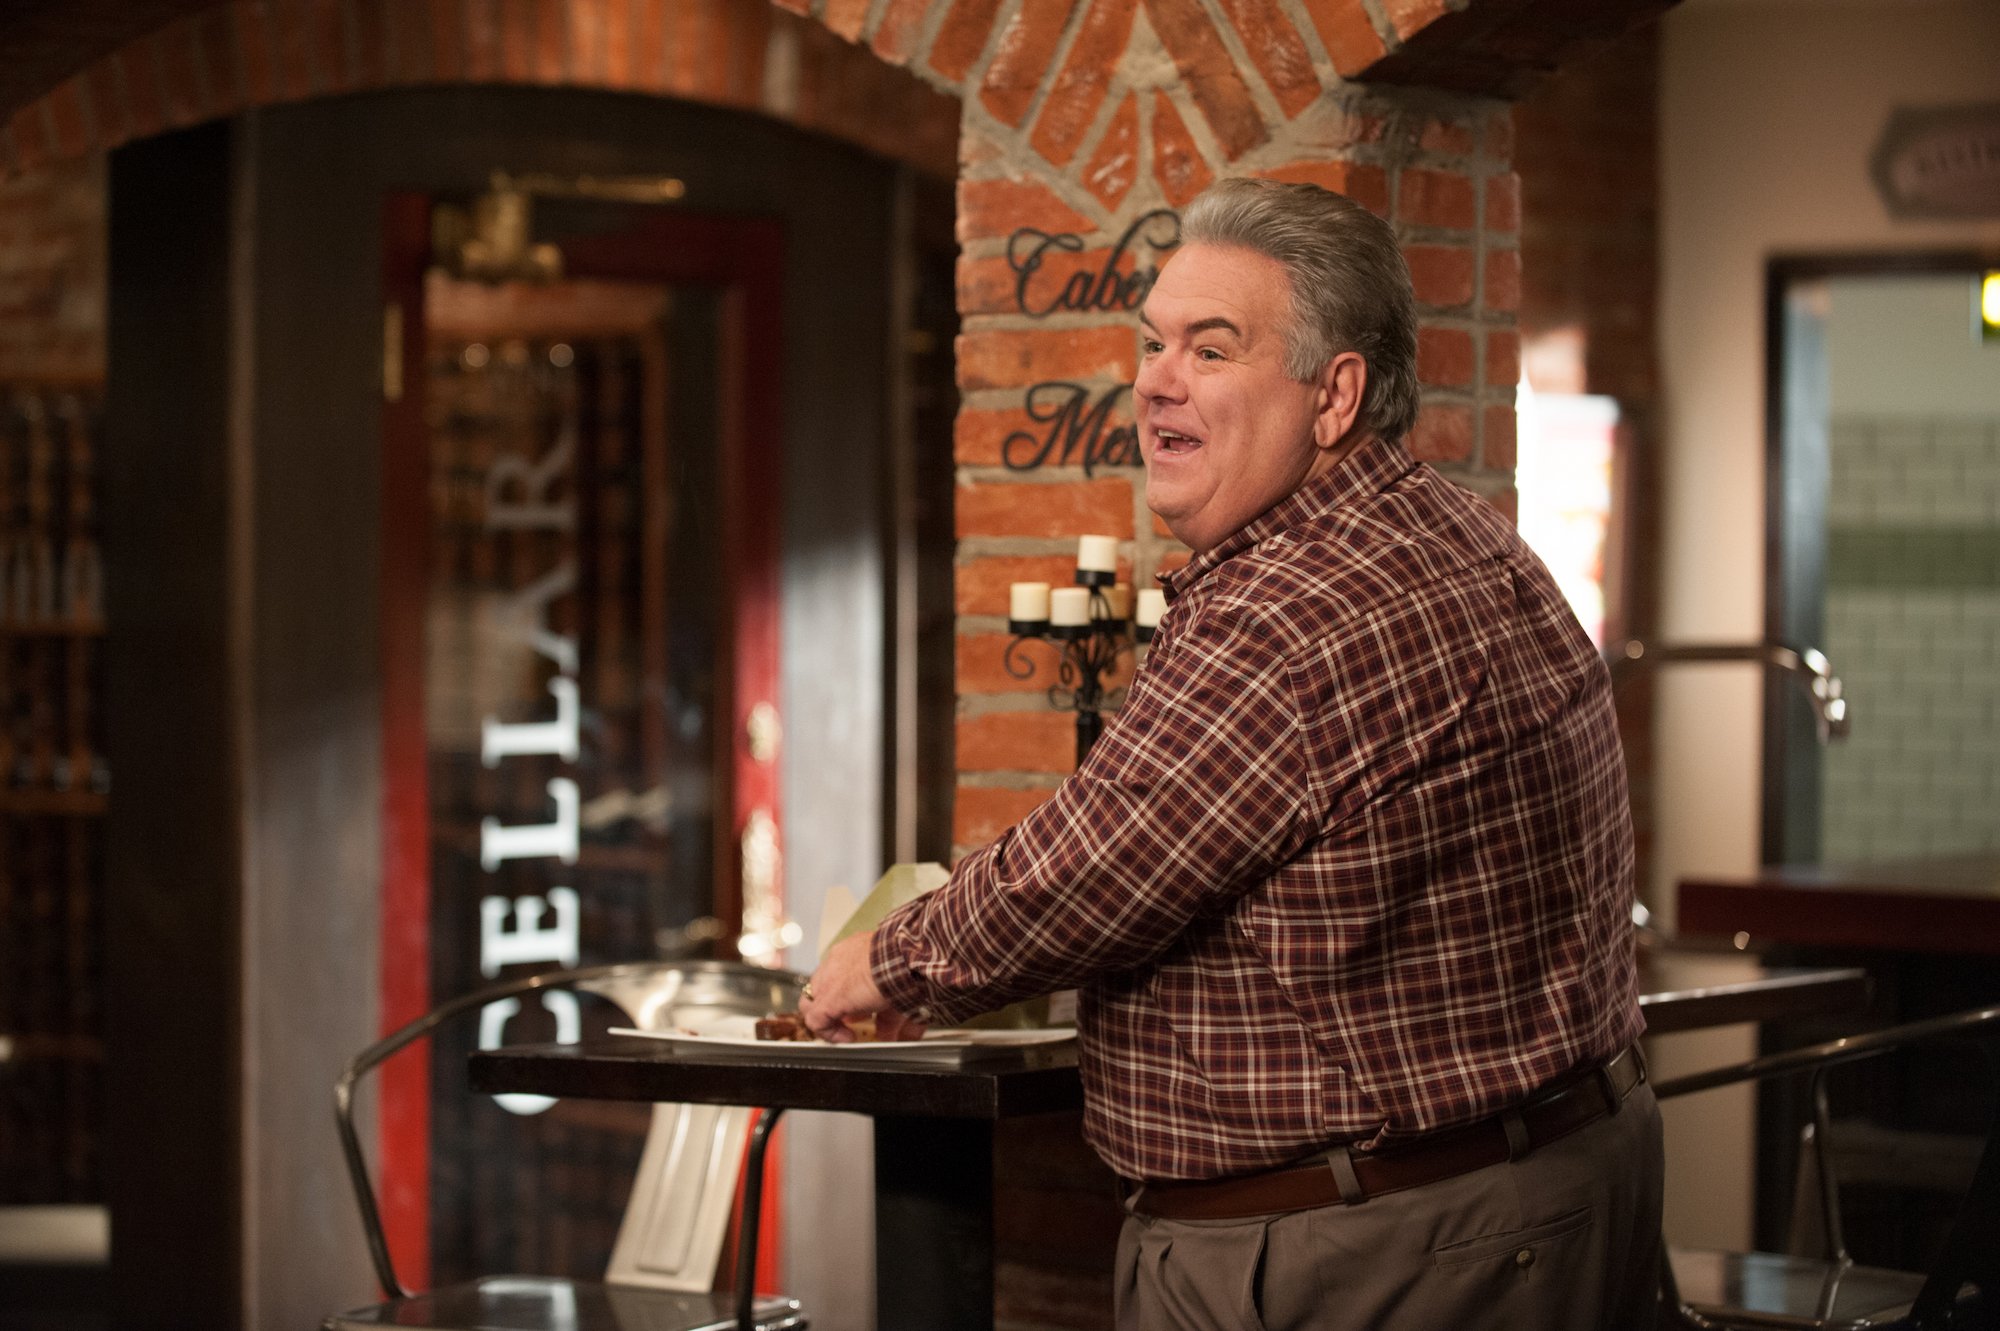 Parks and Recreation star Jim O'Heir stands at a restaurant counter